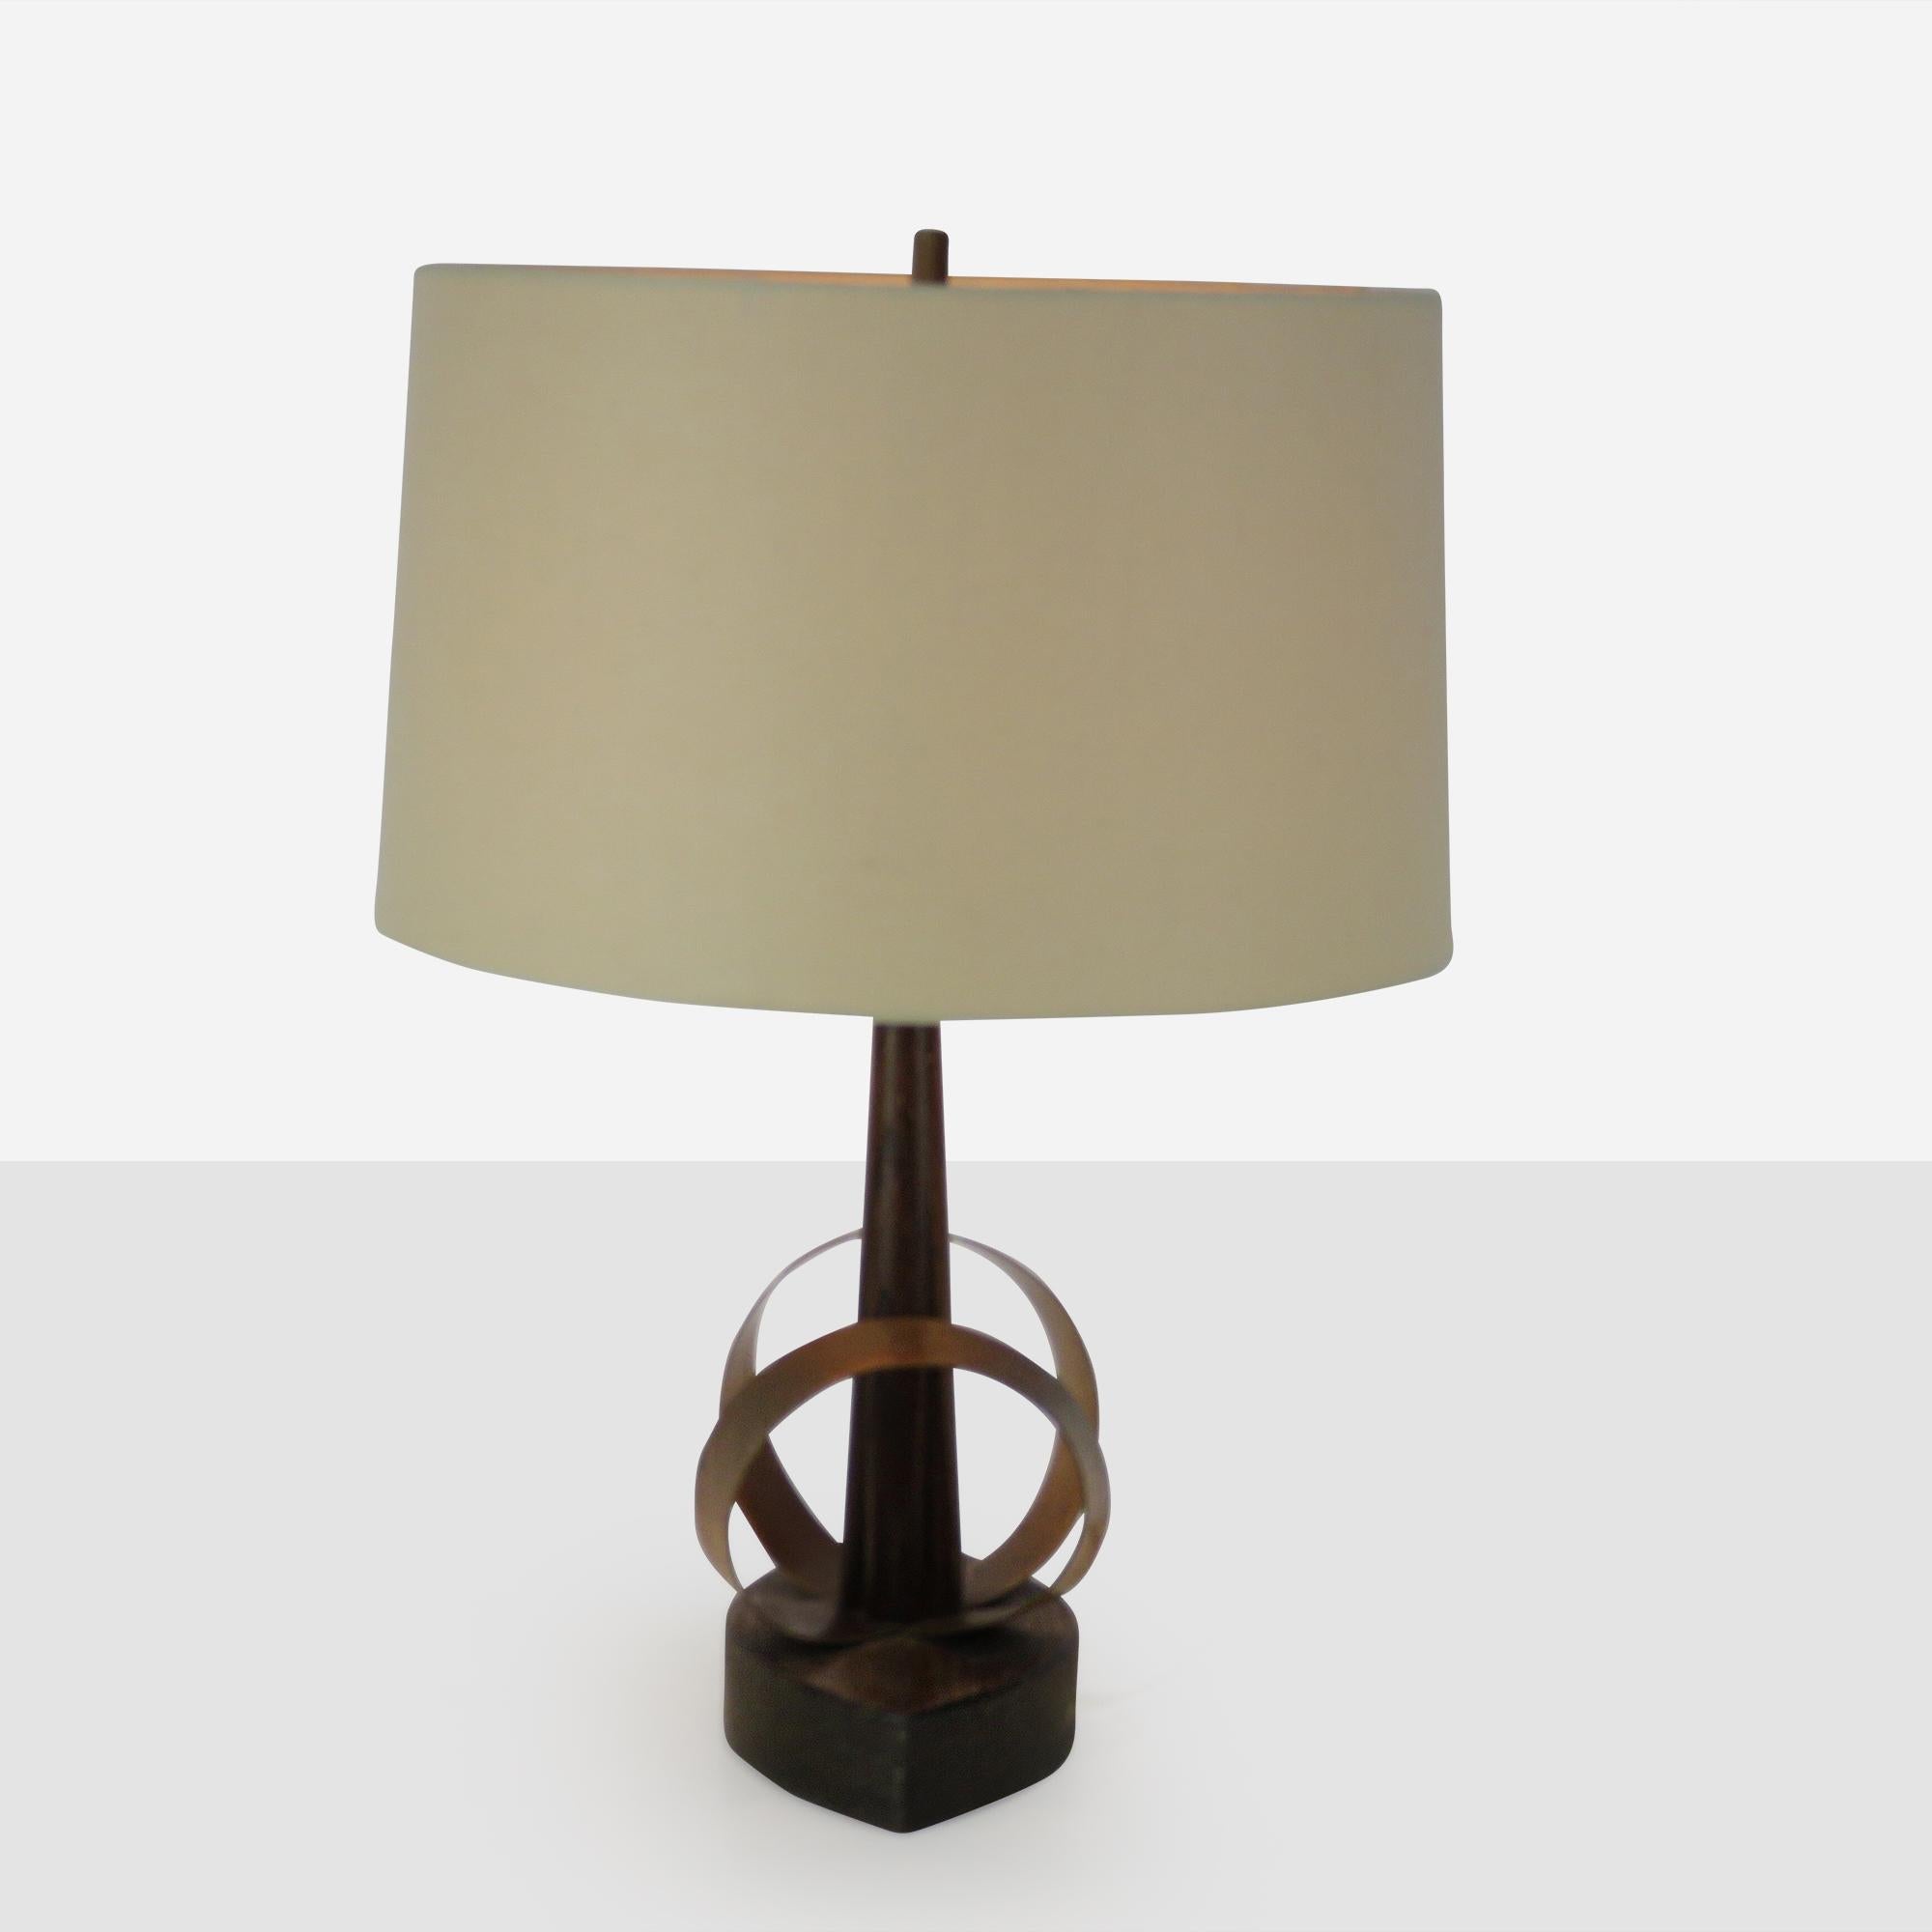 Hand hammered and bent copper and oak table lamp by Yasha Heifetz.